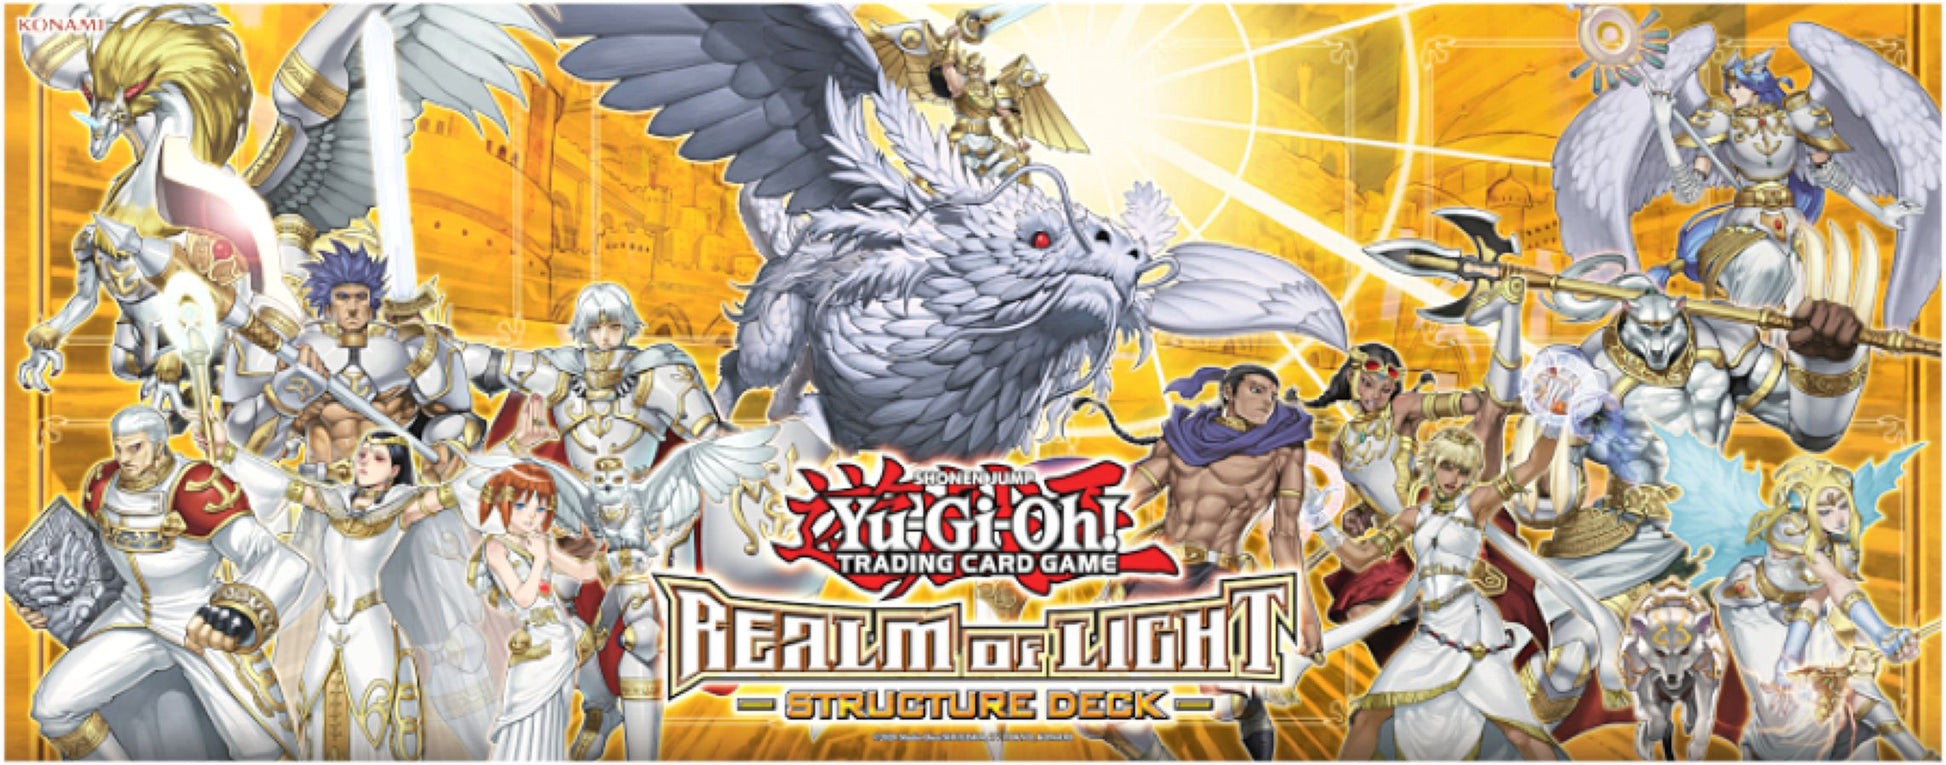 Yu-Gi-Oh - Realm of Light Structure Deck (Display of 8)